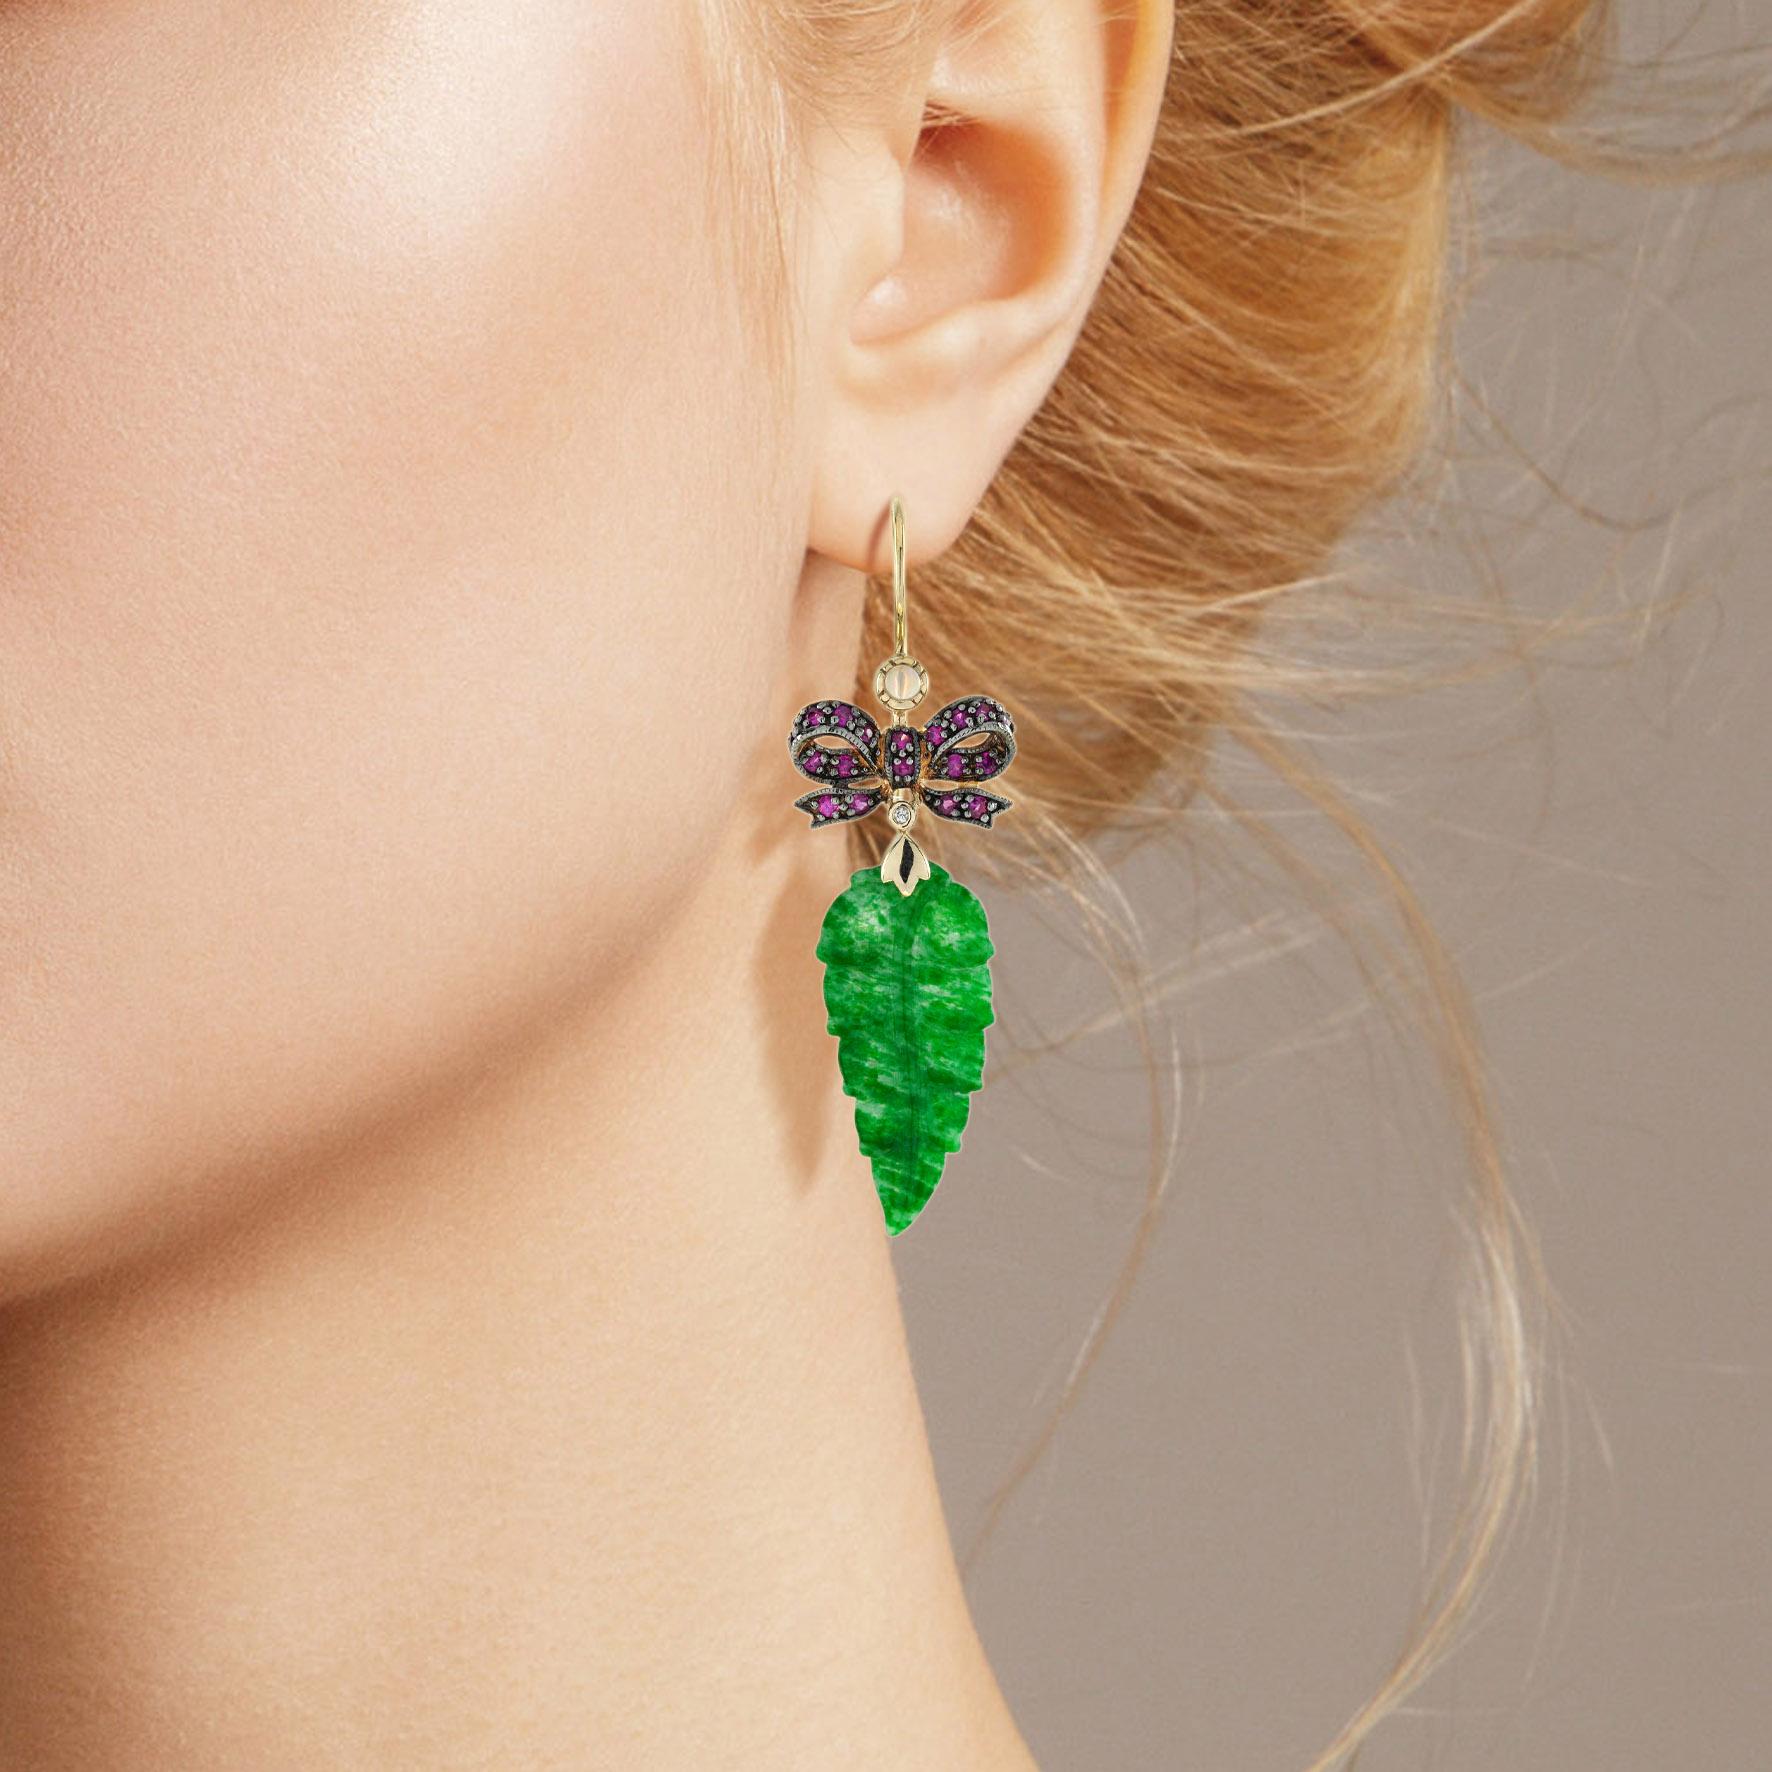 The natural jade in these lovely earrings has some very special shape. Both pieces have a strong green color and well leaf carvings. The jade is suspended in a 9k yellow gold setting with ruby ribbon bow on the top. The earrings transfer their good